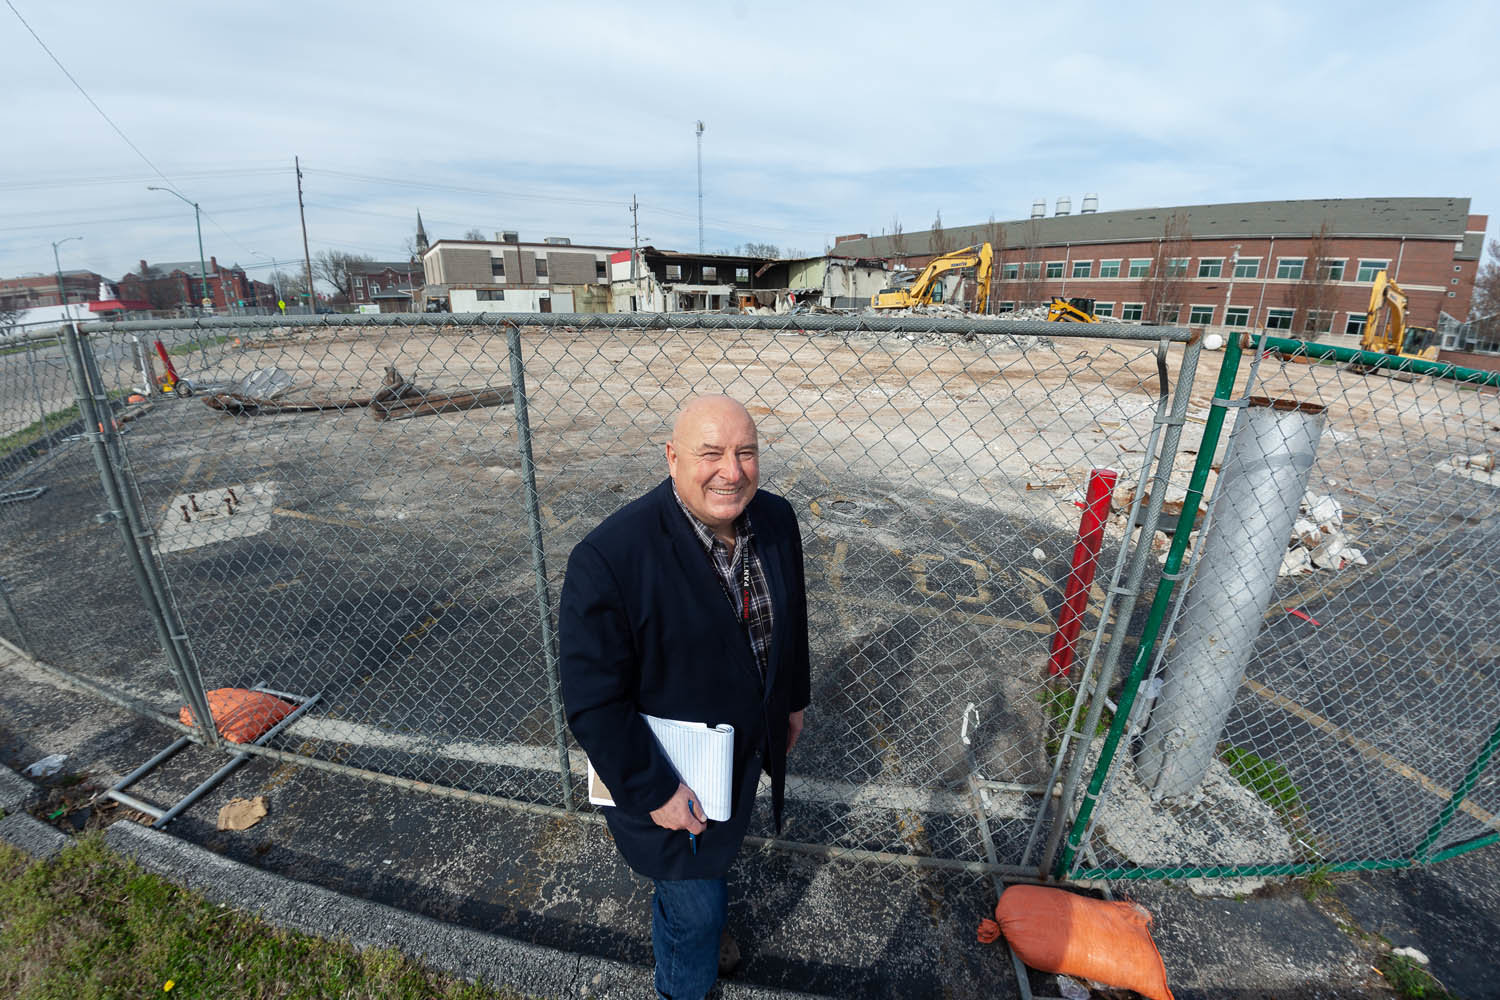 Drury University executive David Hinson stands at the corner of Benton Avenue and Chestnut Expressway, where the school razed buildings for future expansion purposes.